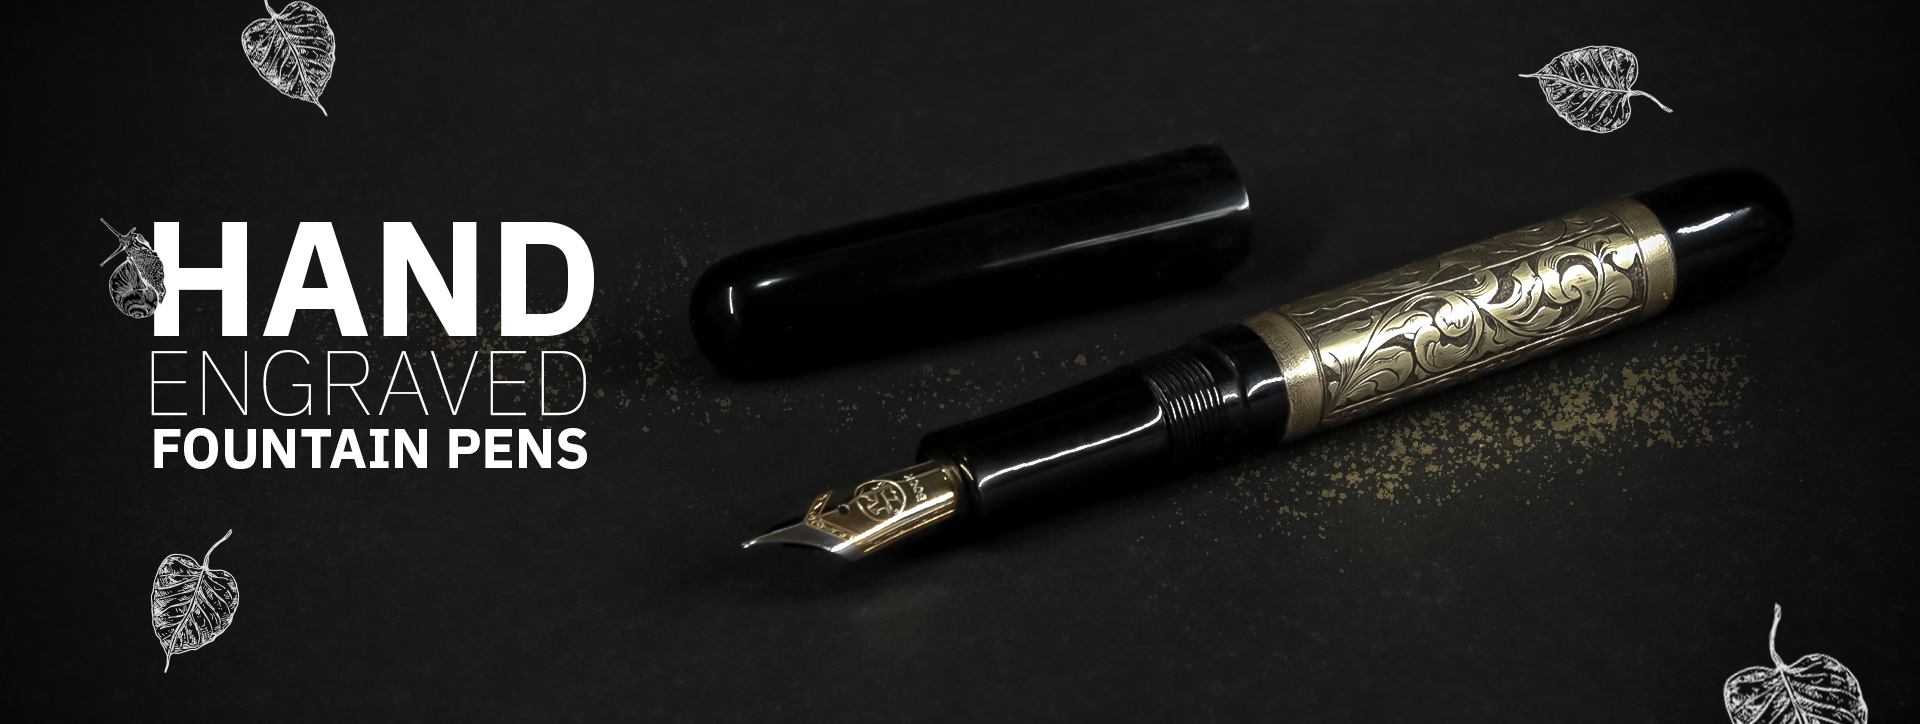 HAND ENGRAVED FOUNTAIN PENS